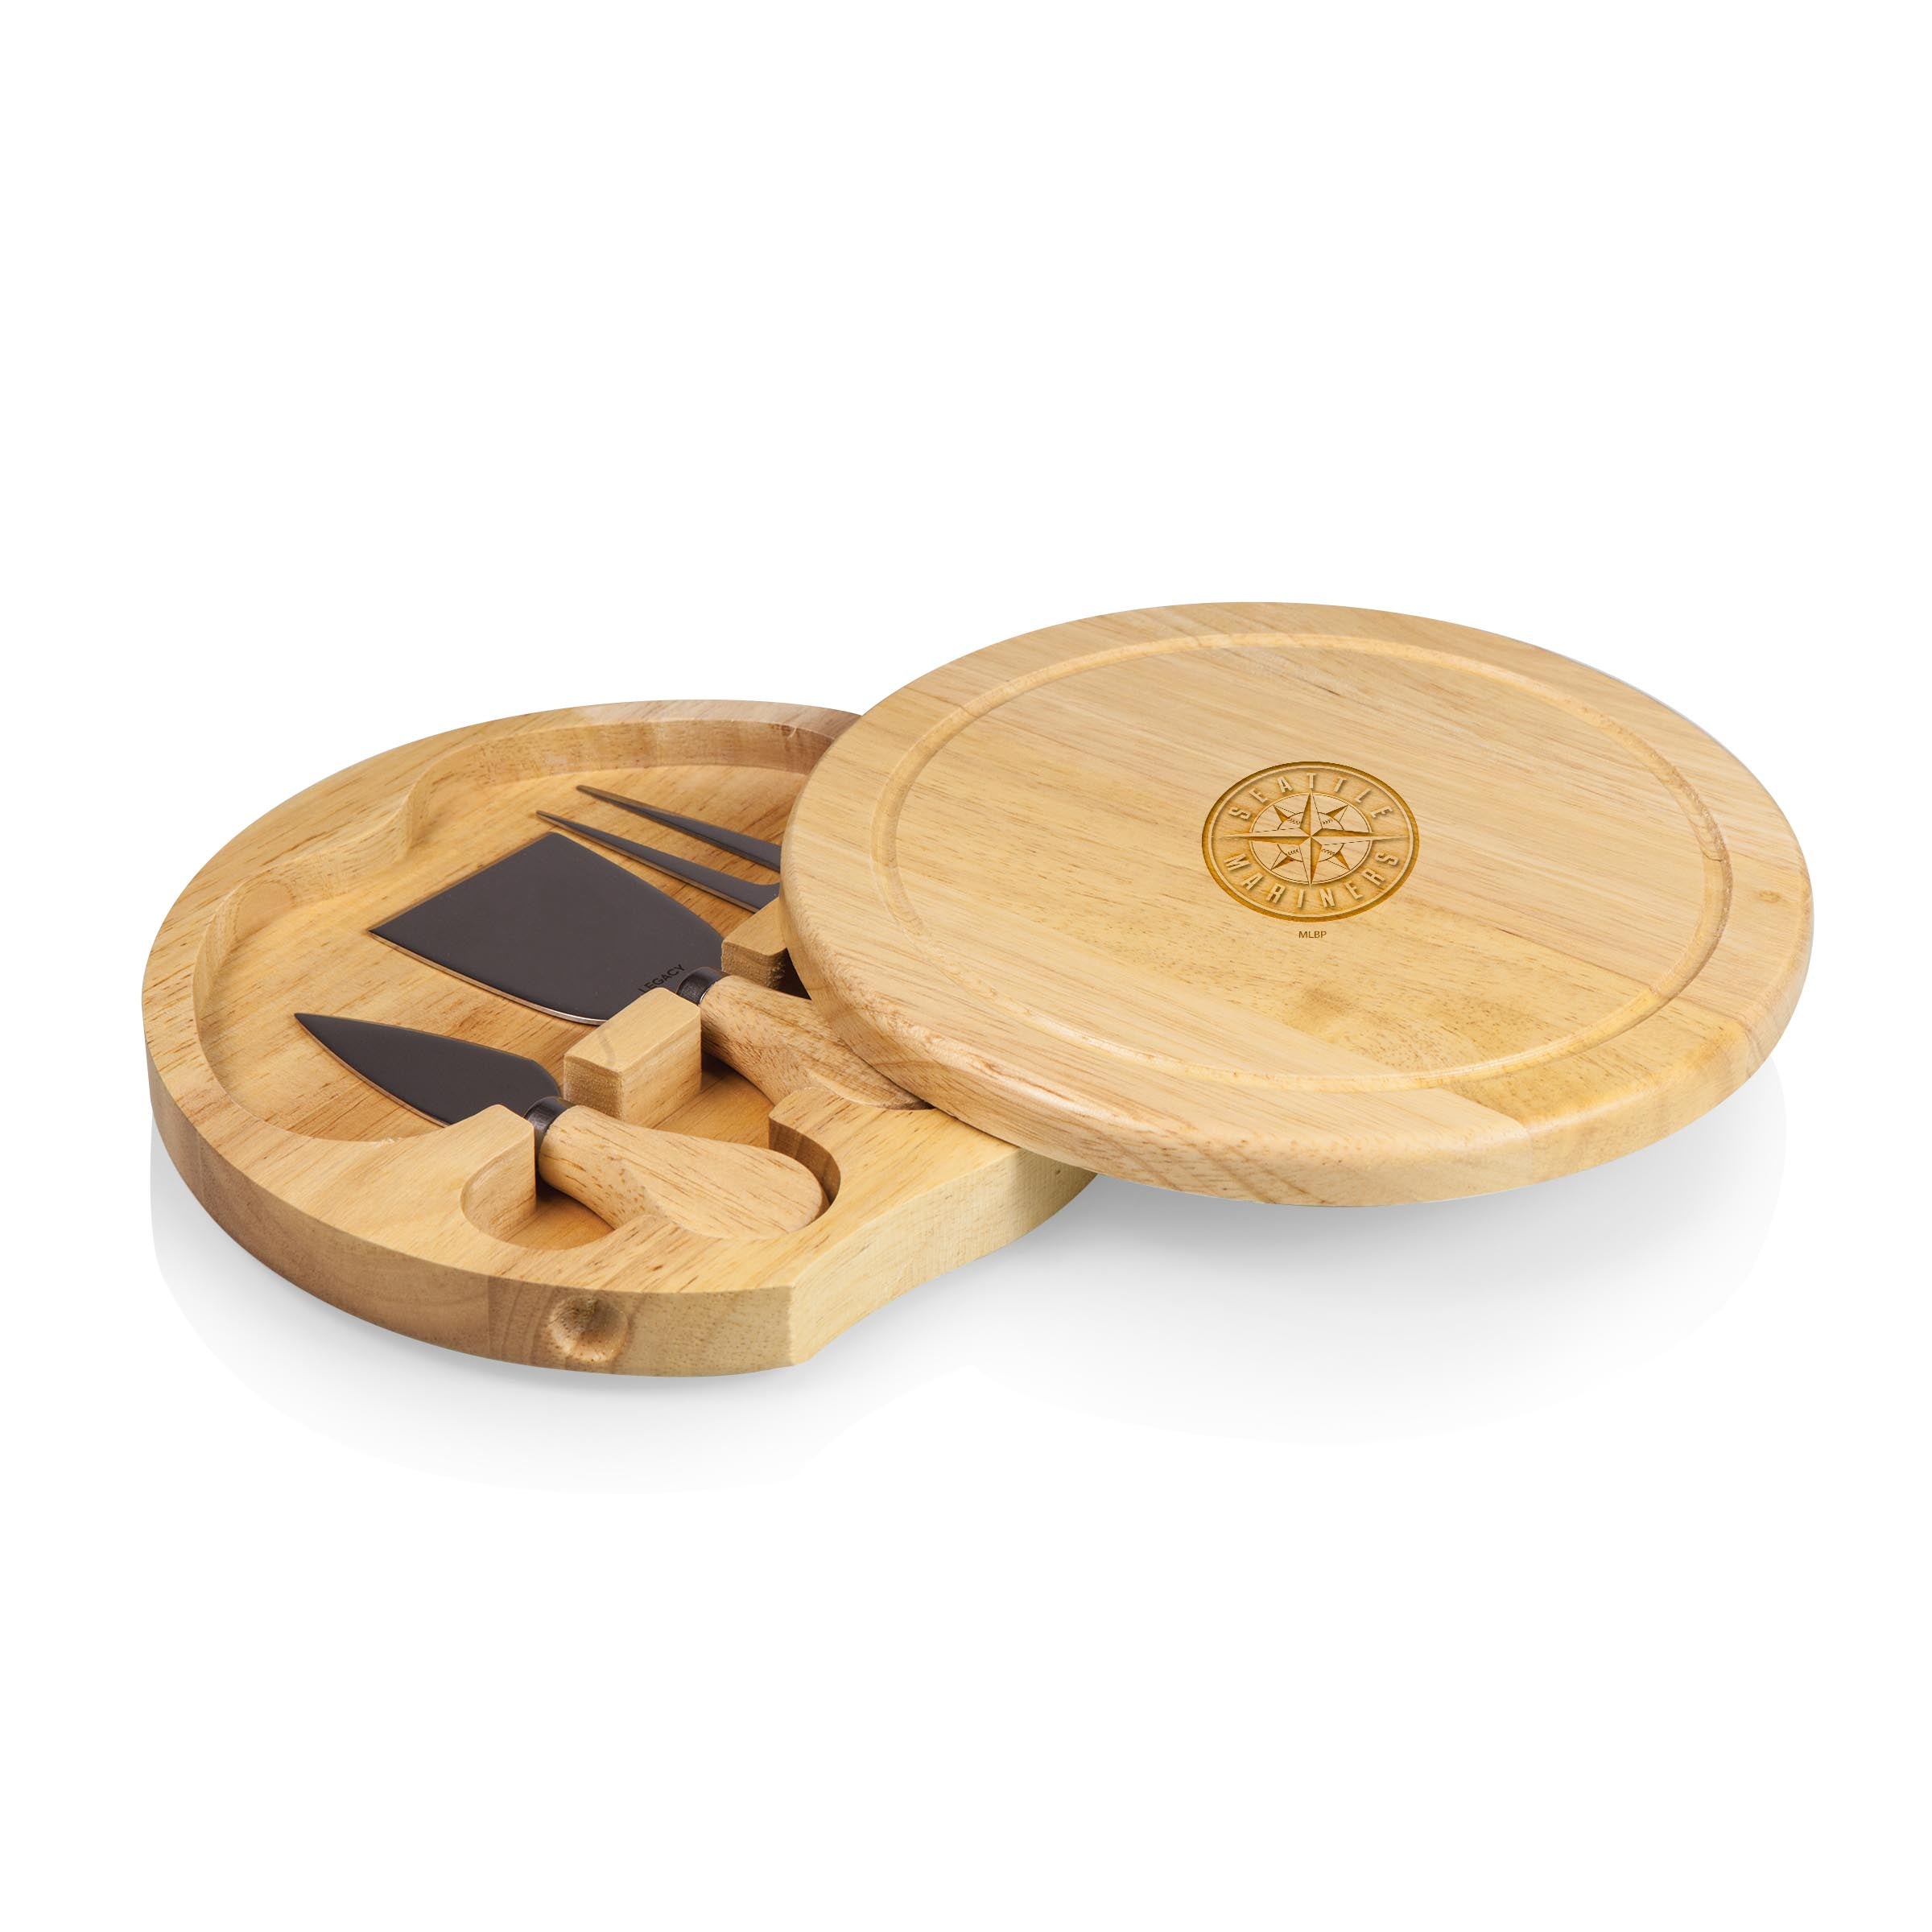 Seattle Mariners - Brie Cheese Cutting Board & Tools Set